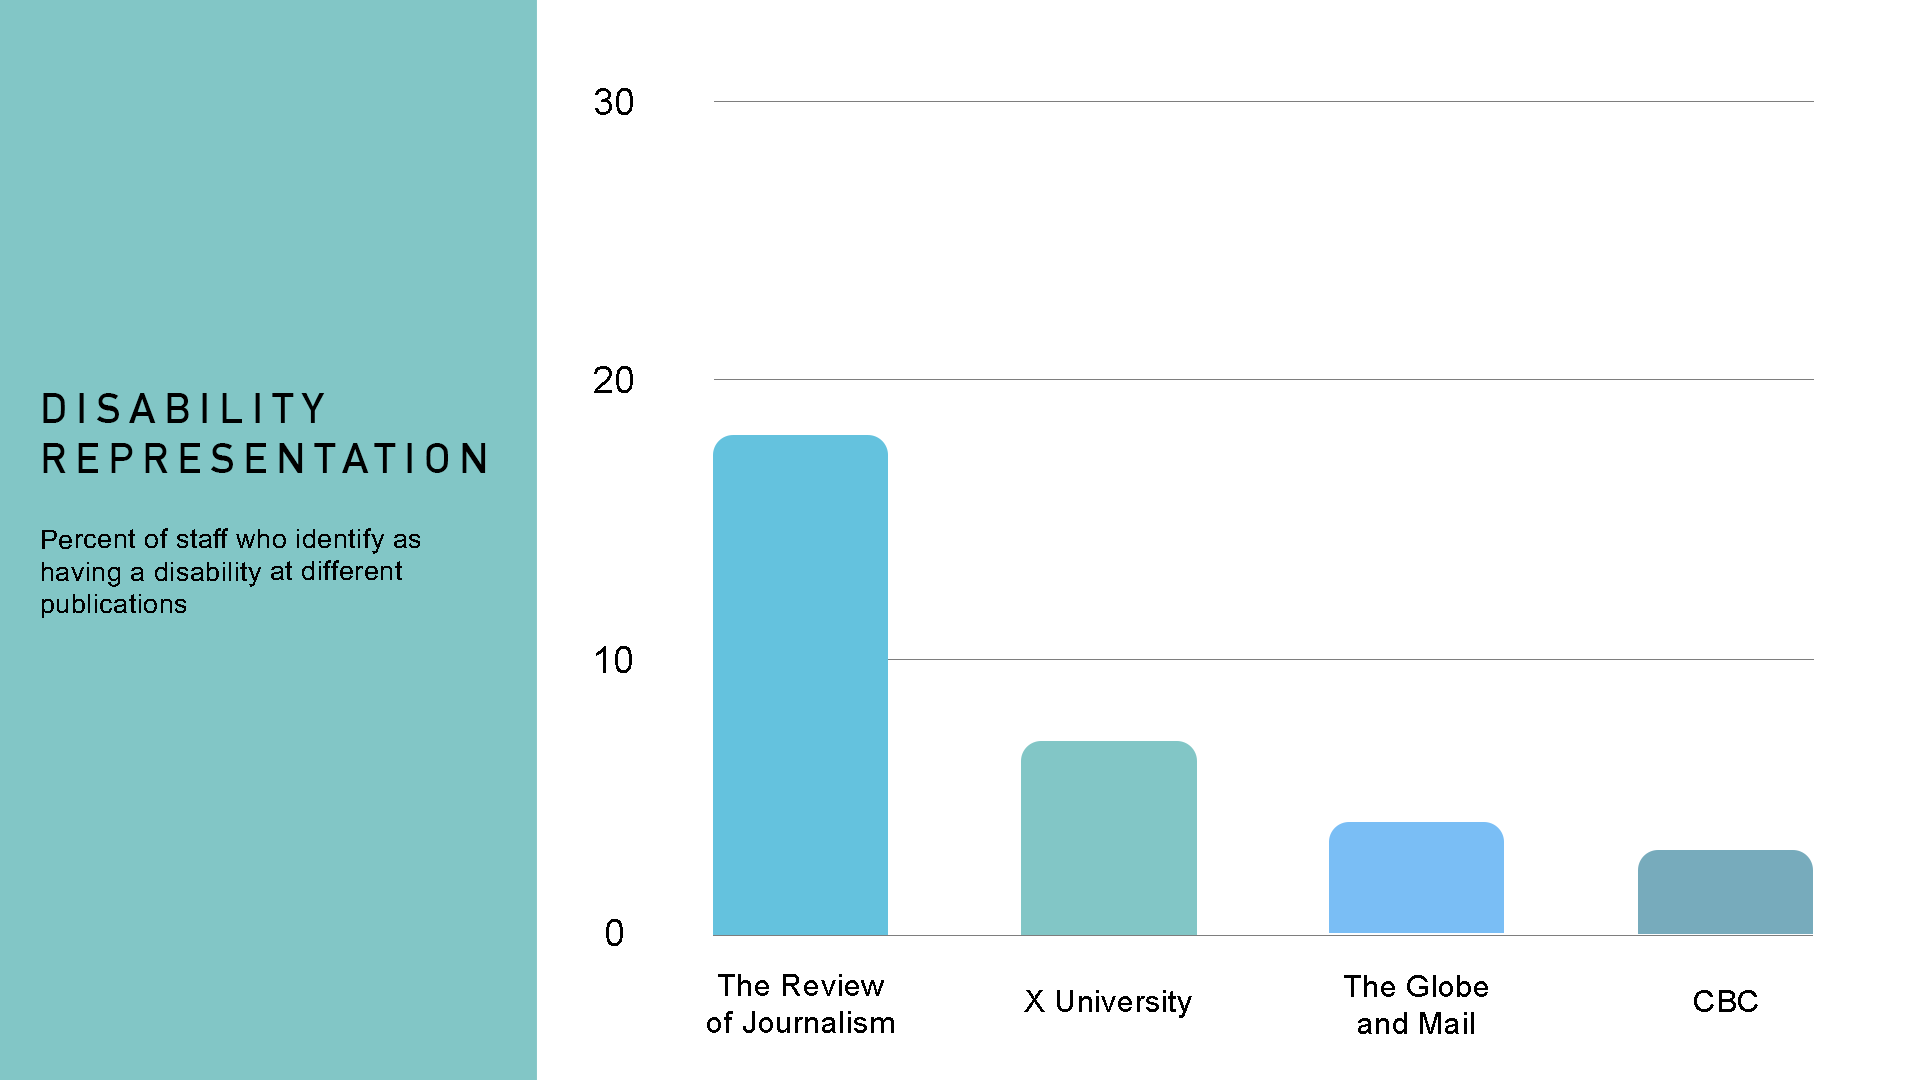 A bar graph representing the percentage of people with disabilities at The Review of Journalism, X University, The Globe and Mail, and CBC/Radio Canada.